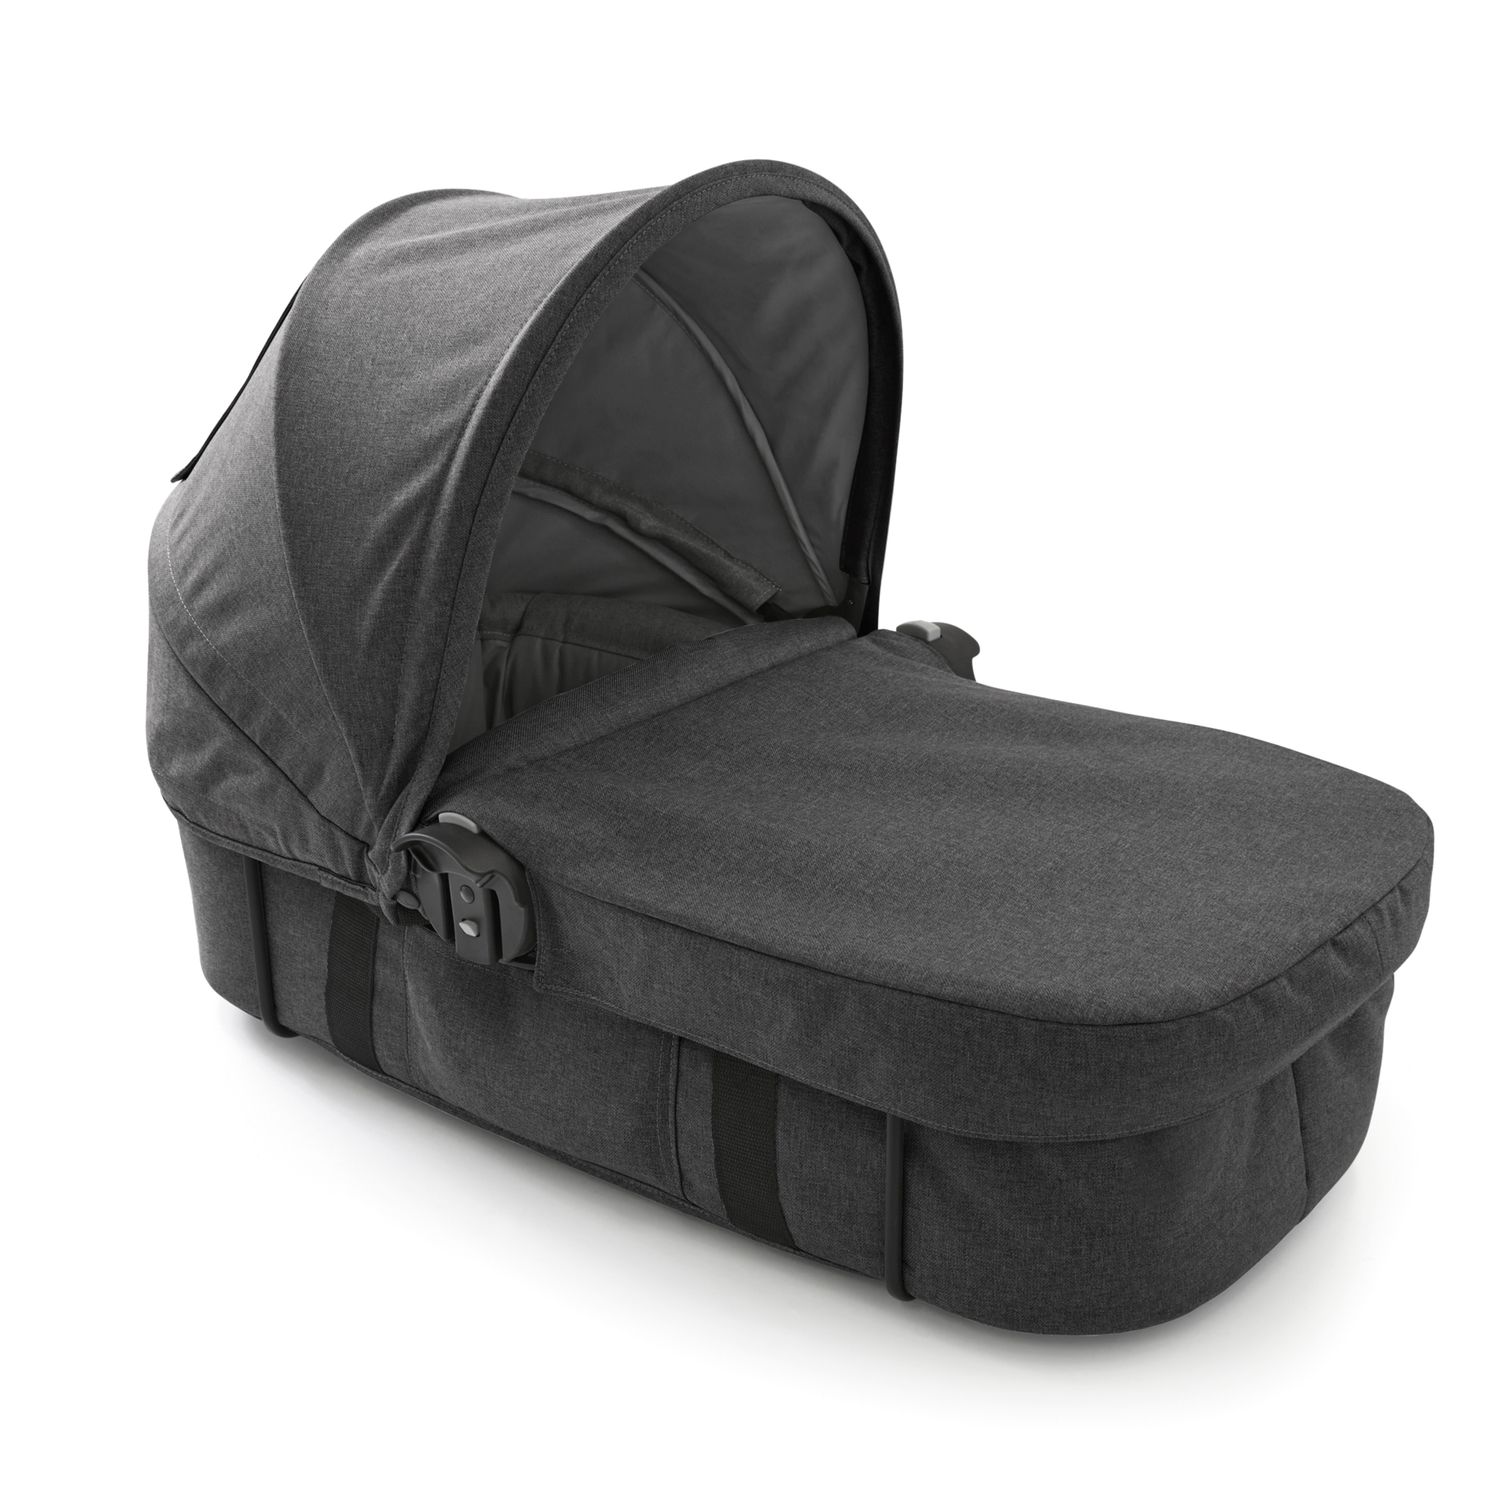 city select deluxe bassinet